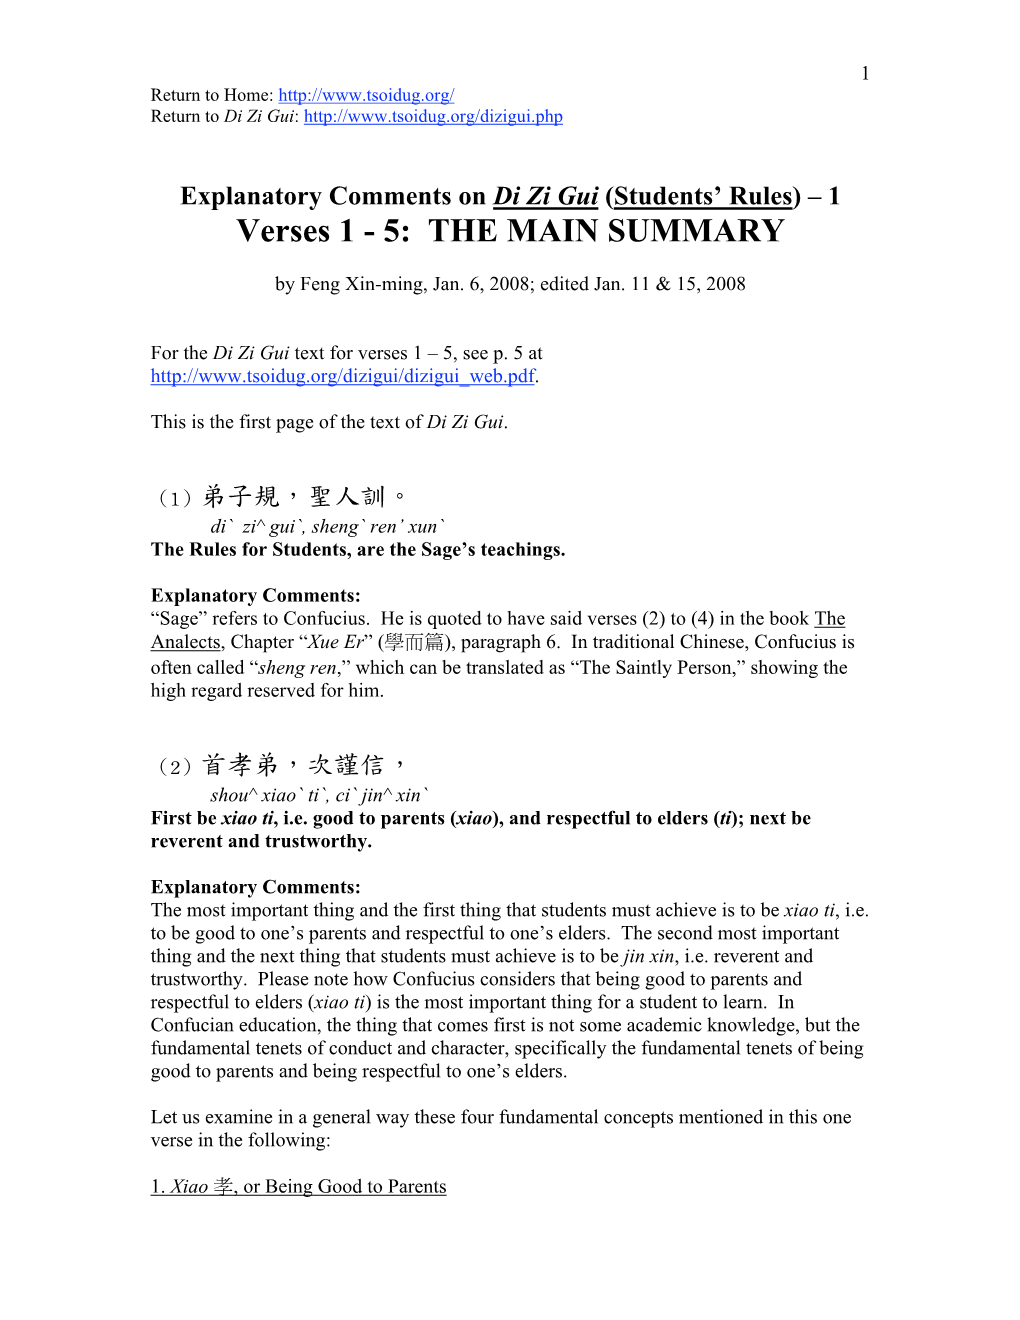 Explanatory Comments on Di Zi Gui (Students' Rules)